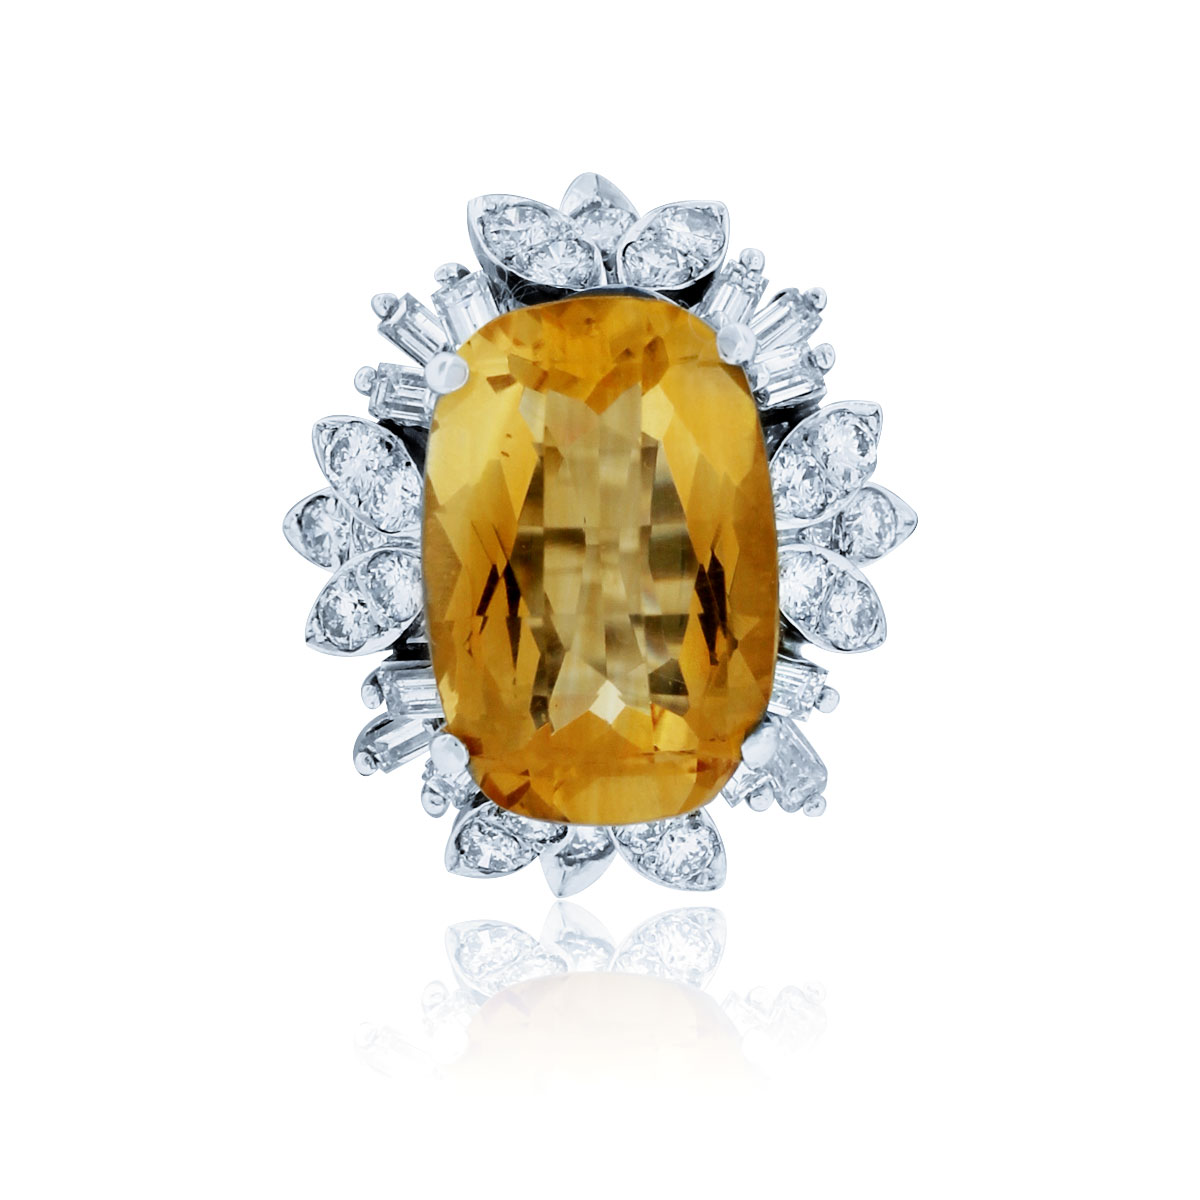 You are viewing this 14K White Gold Citrine & Diamond Cluster Ring